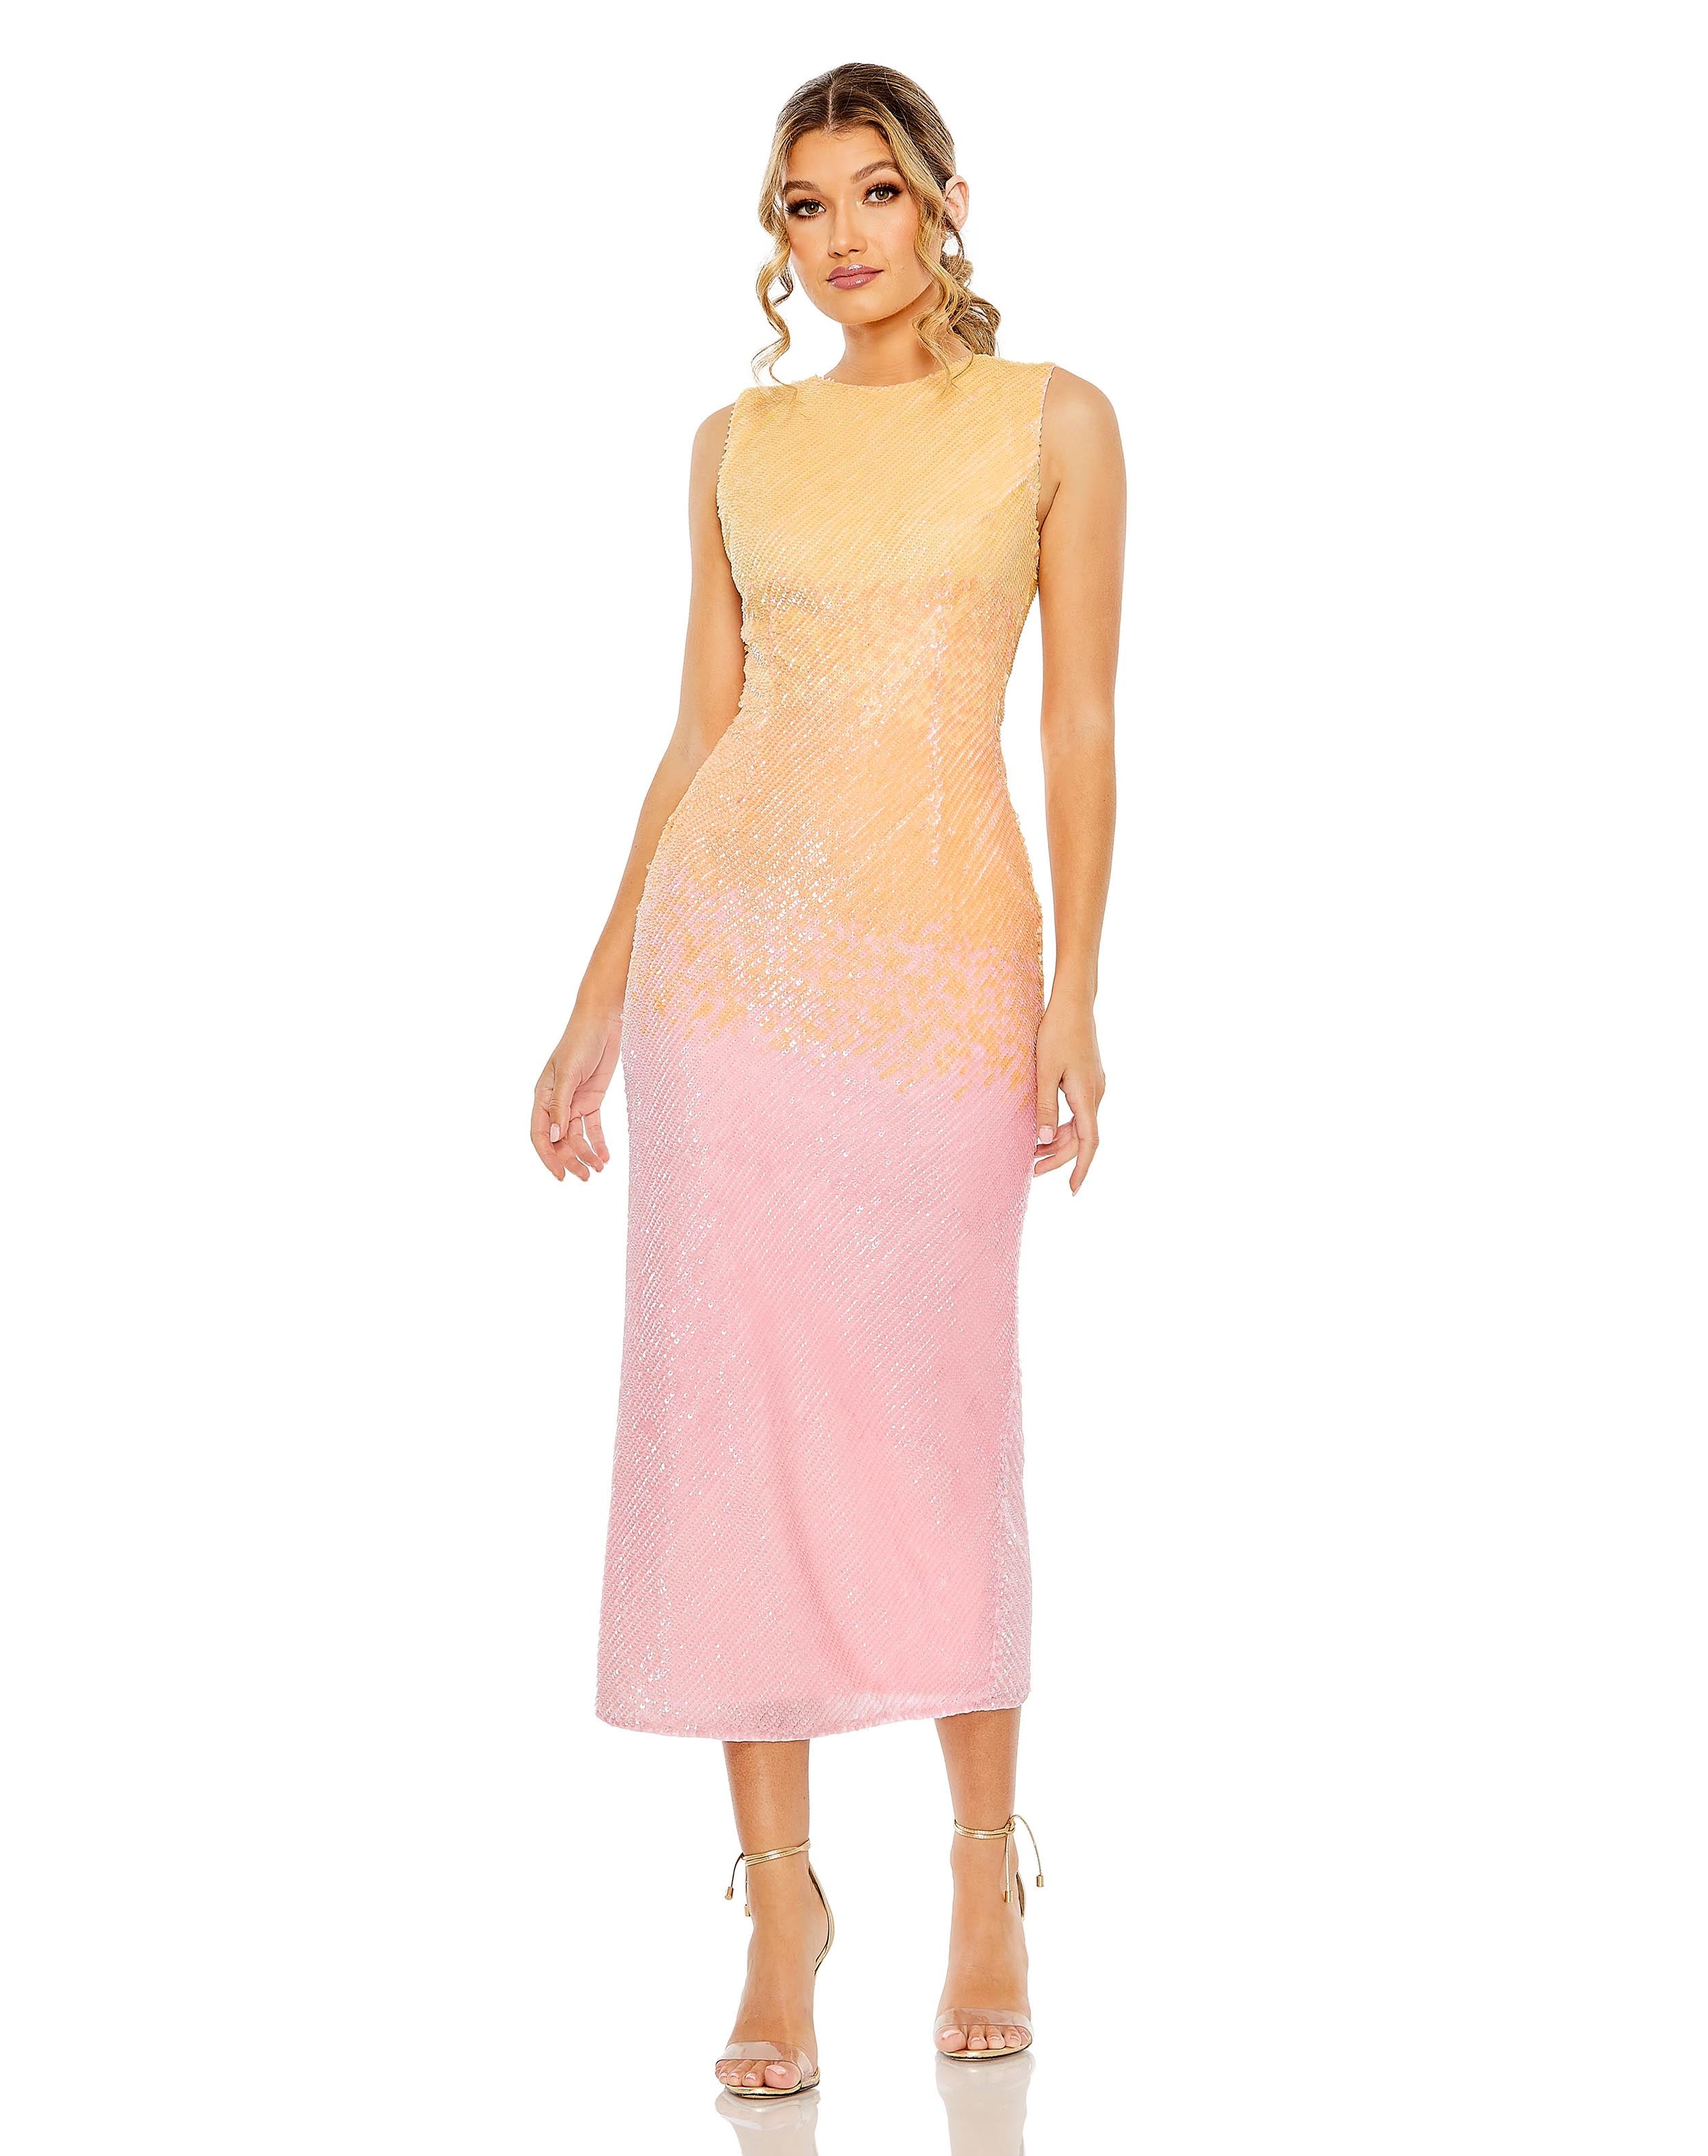 High Neck Ombre Sequin Cocktail Dress